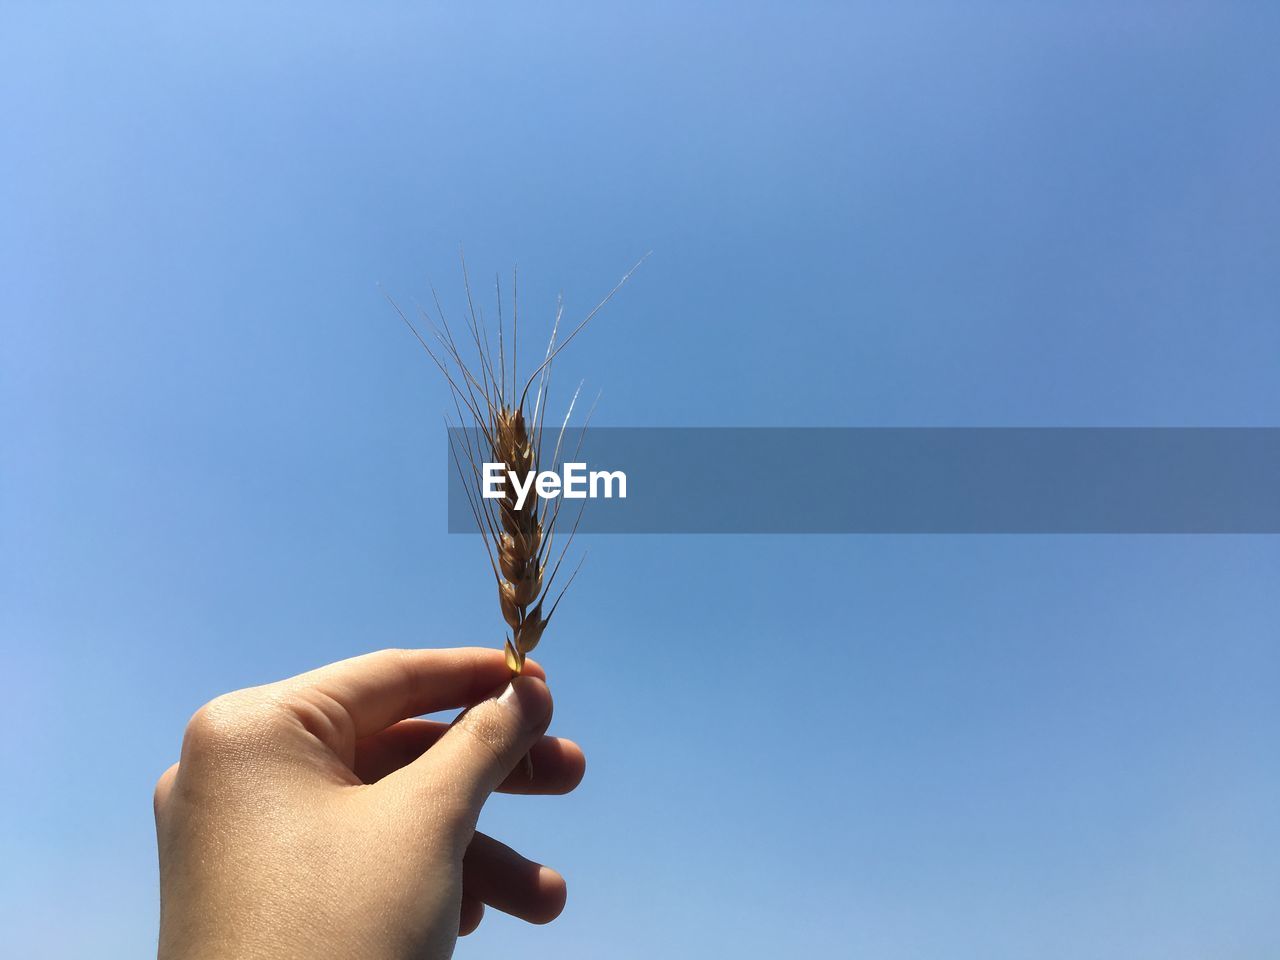 Cropped hand of person holding plant stem against sky